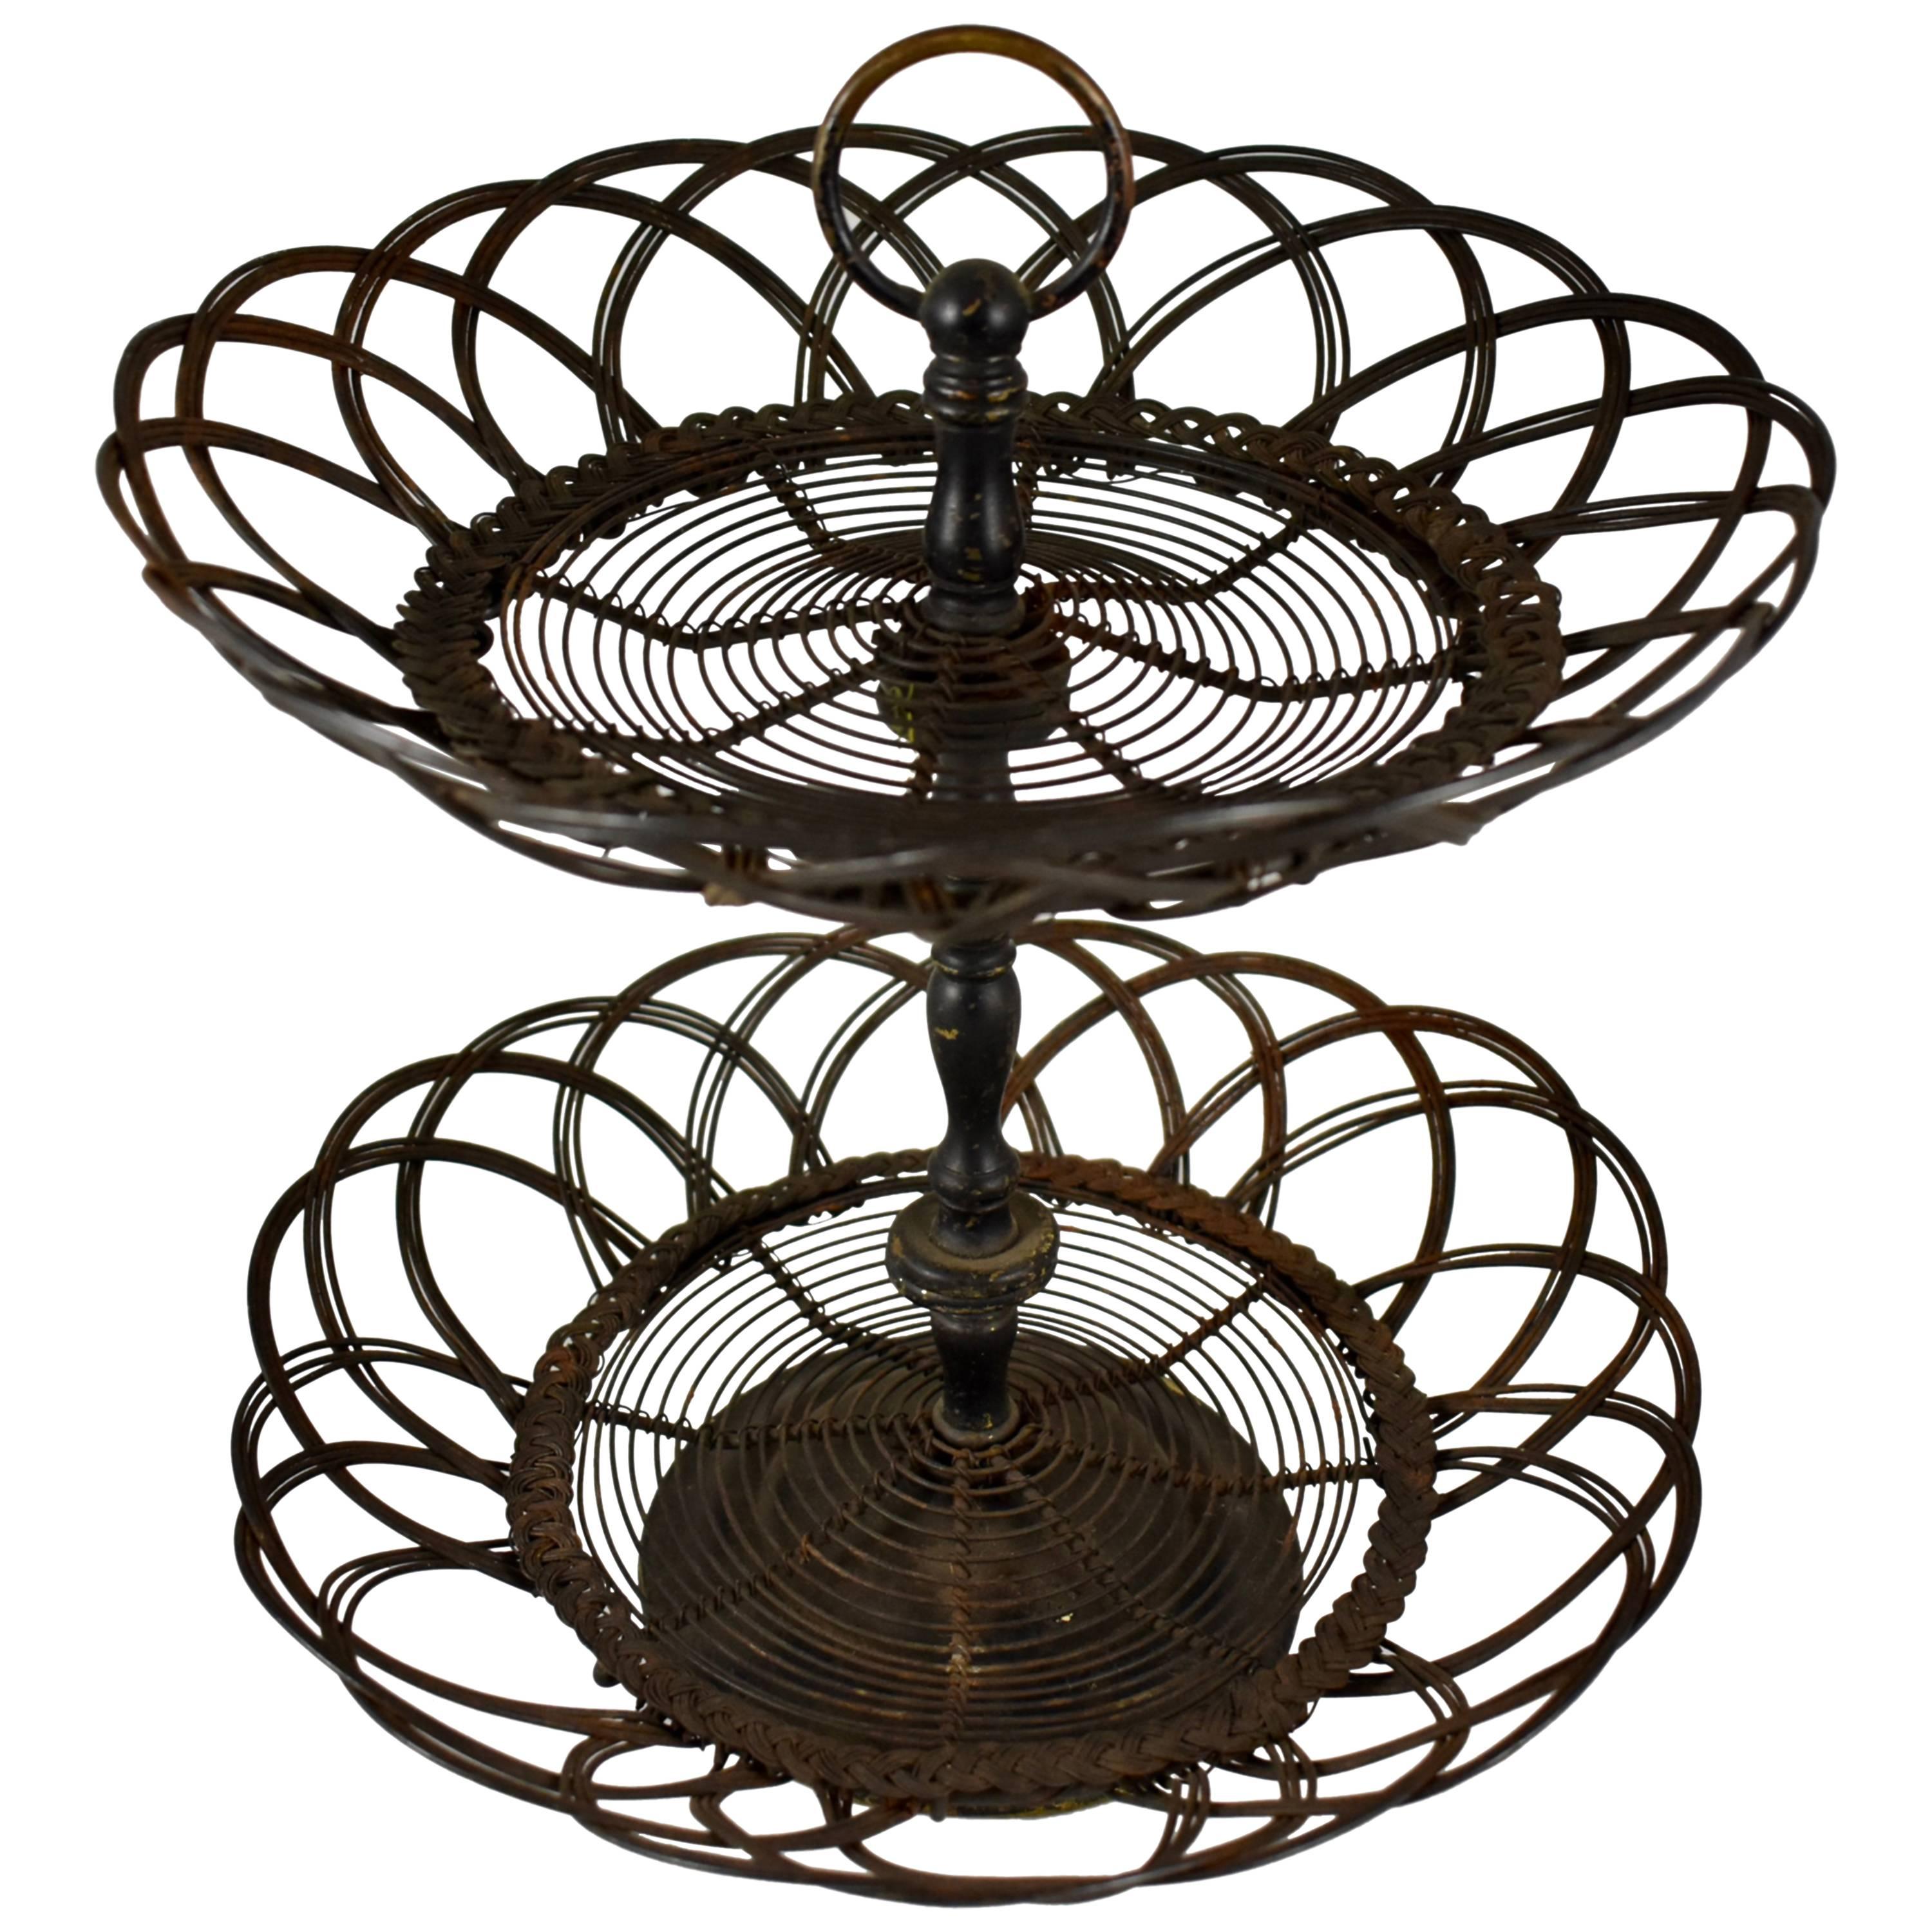 French Two-Tier Twisted Wire Footed Egg Stand Basket, Late 19th Century